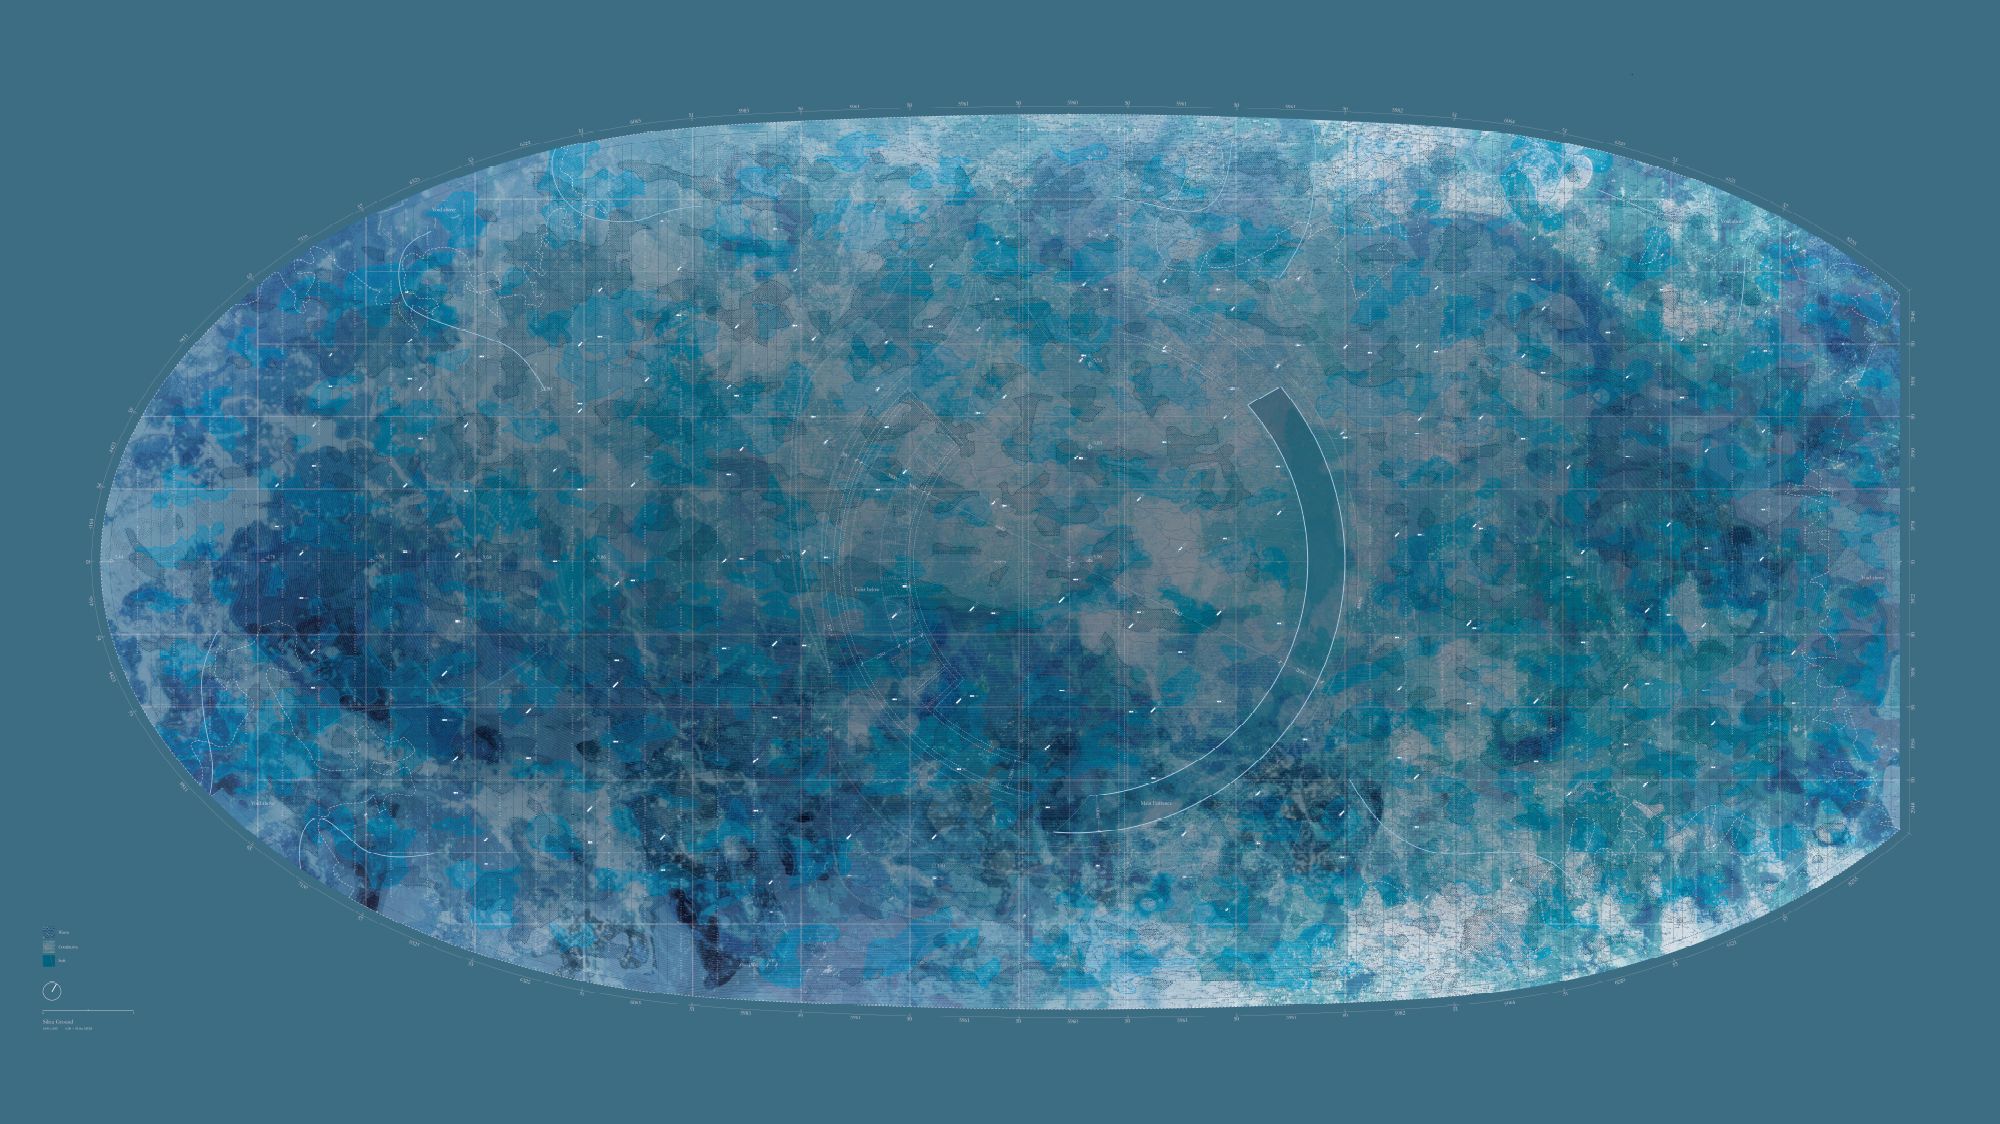 An illustration of an oval shaped blue speckled blob, with an unidentifiable dark shape inside